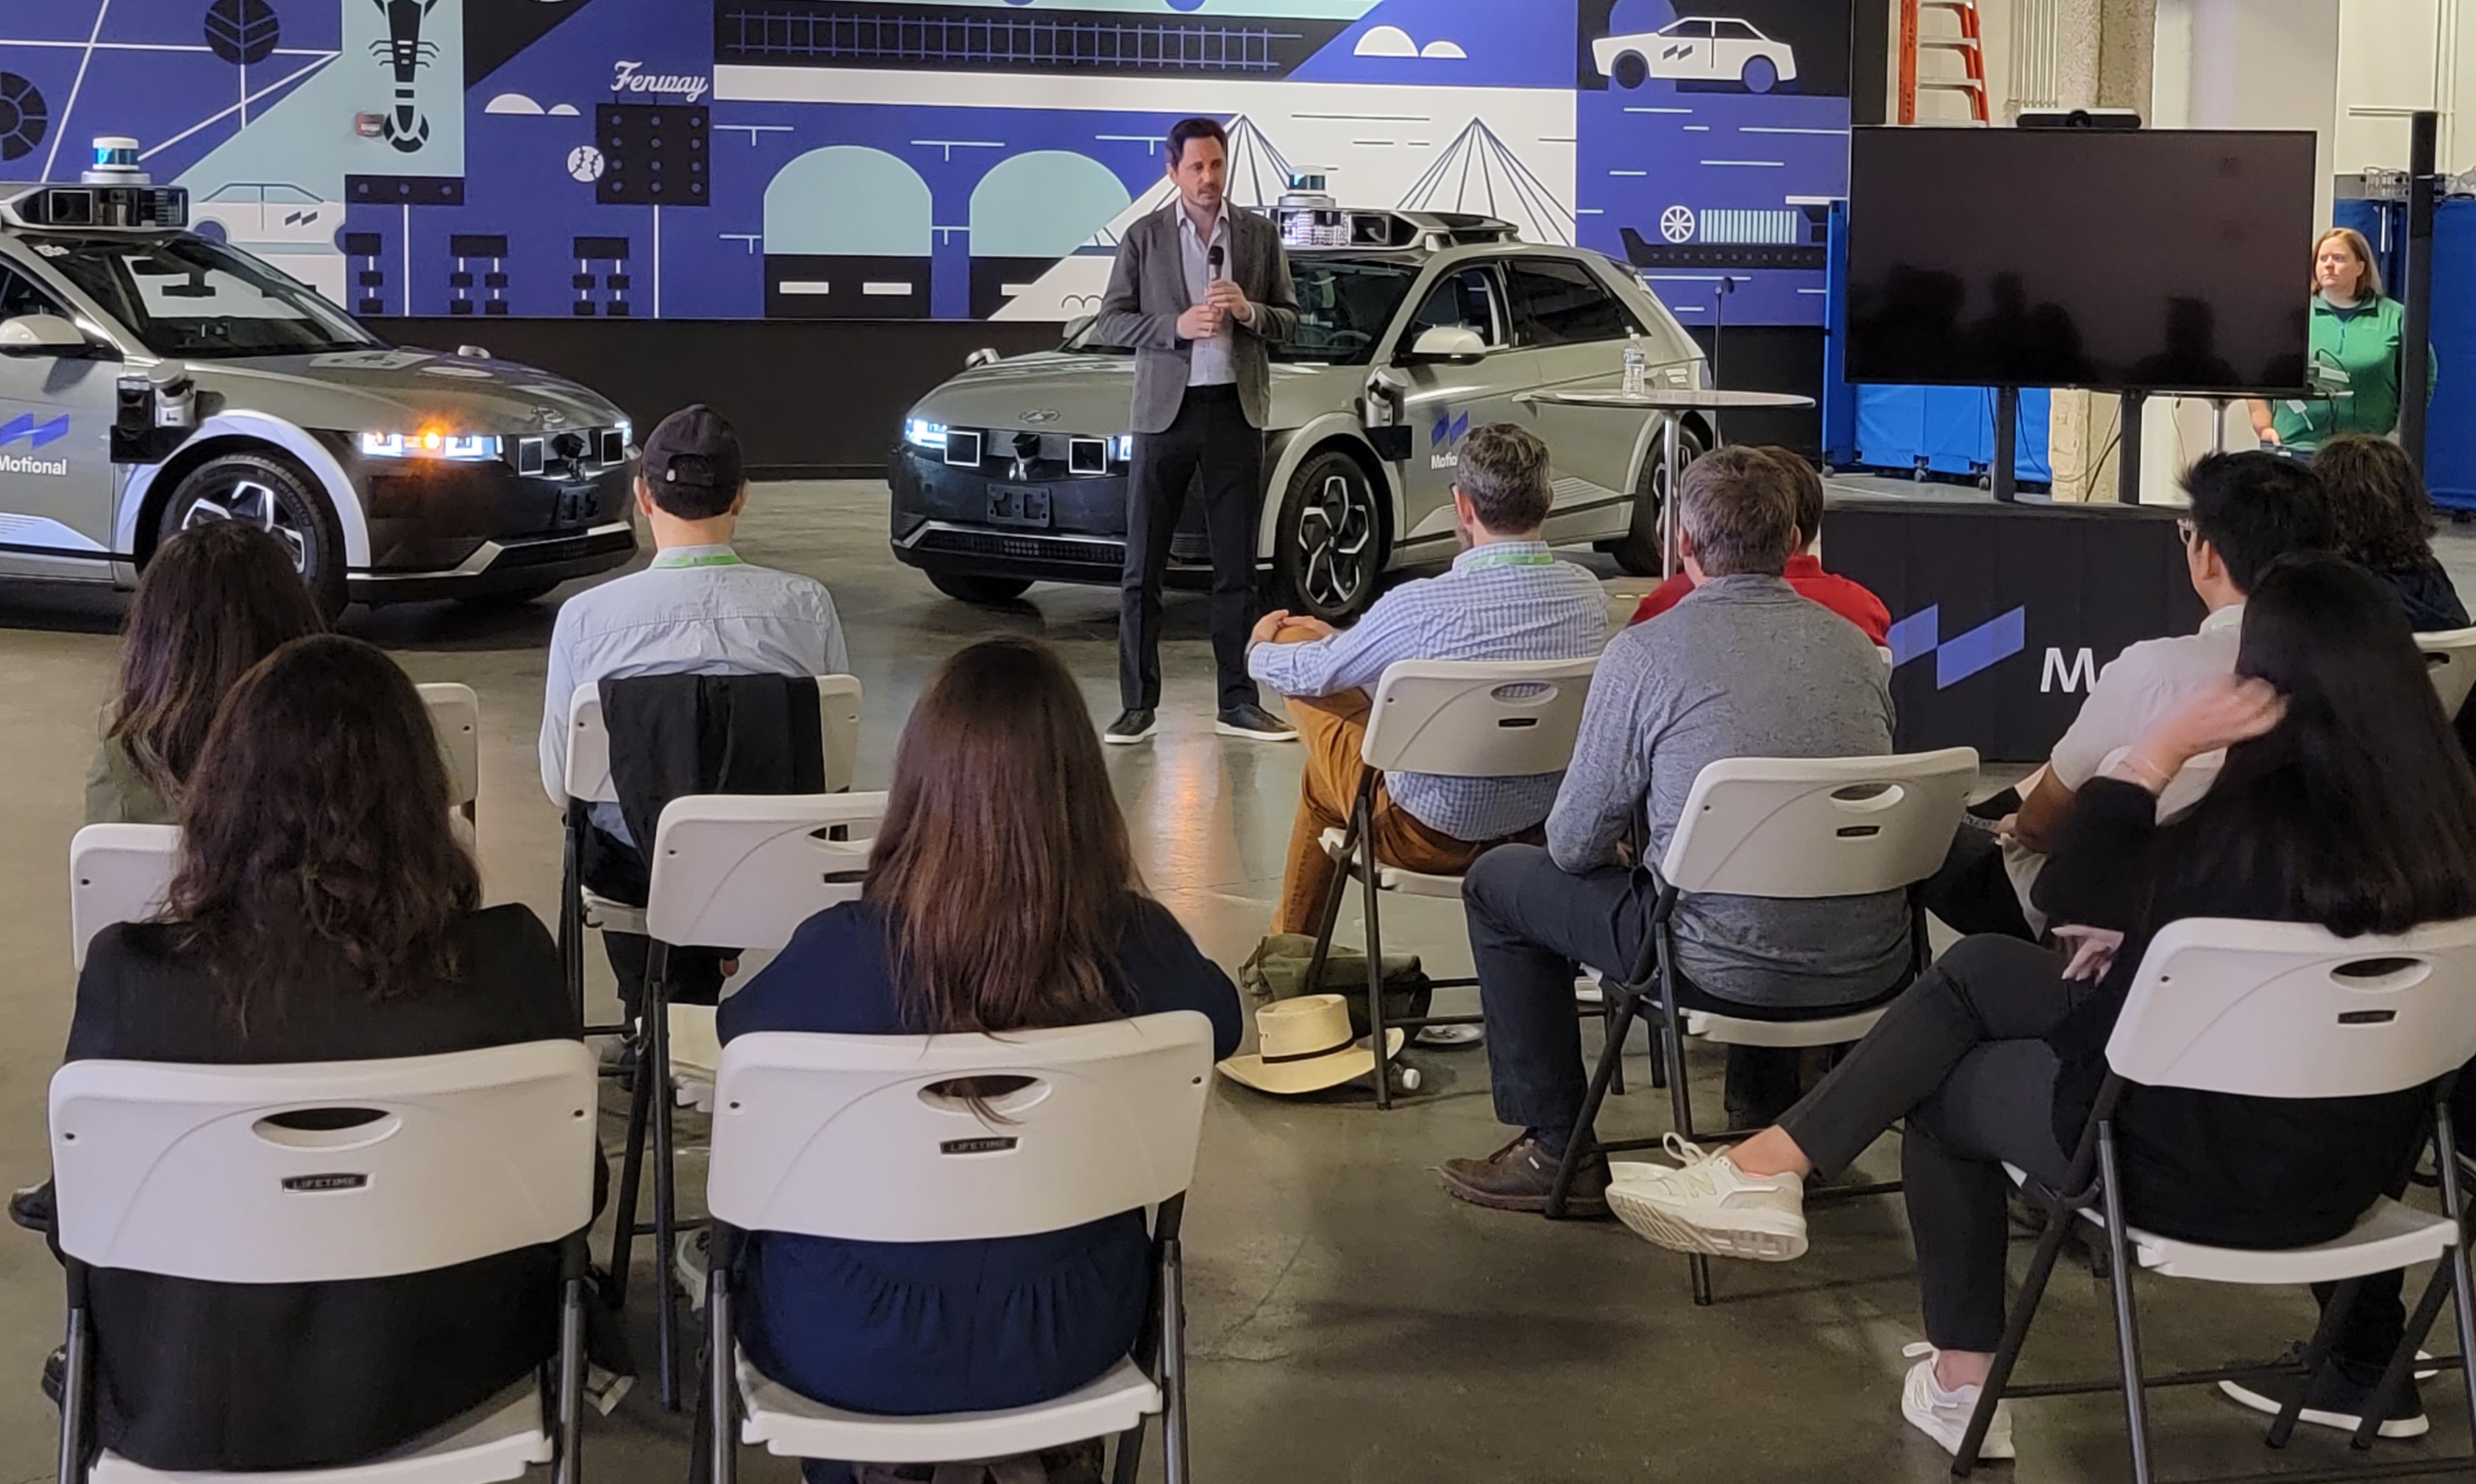 Motional President & CEO Karl Iagnemma stands in front of two IONIQ 5 robotaxis inside a garage addressing a seated crowd